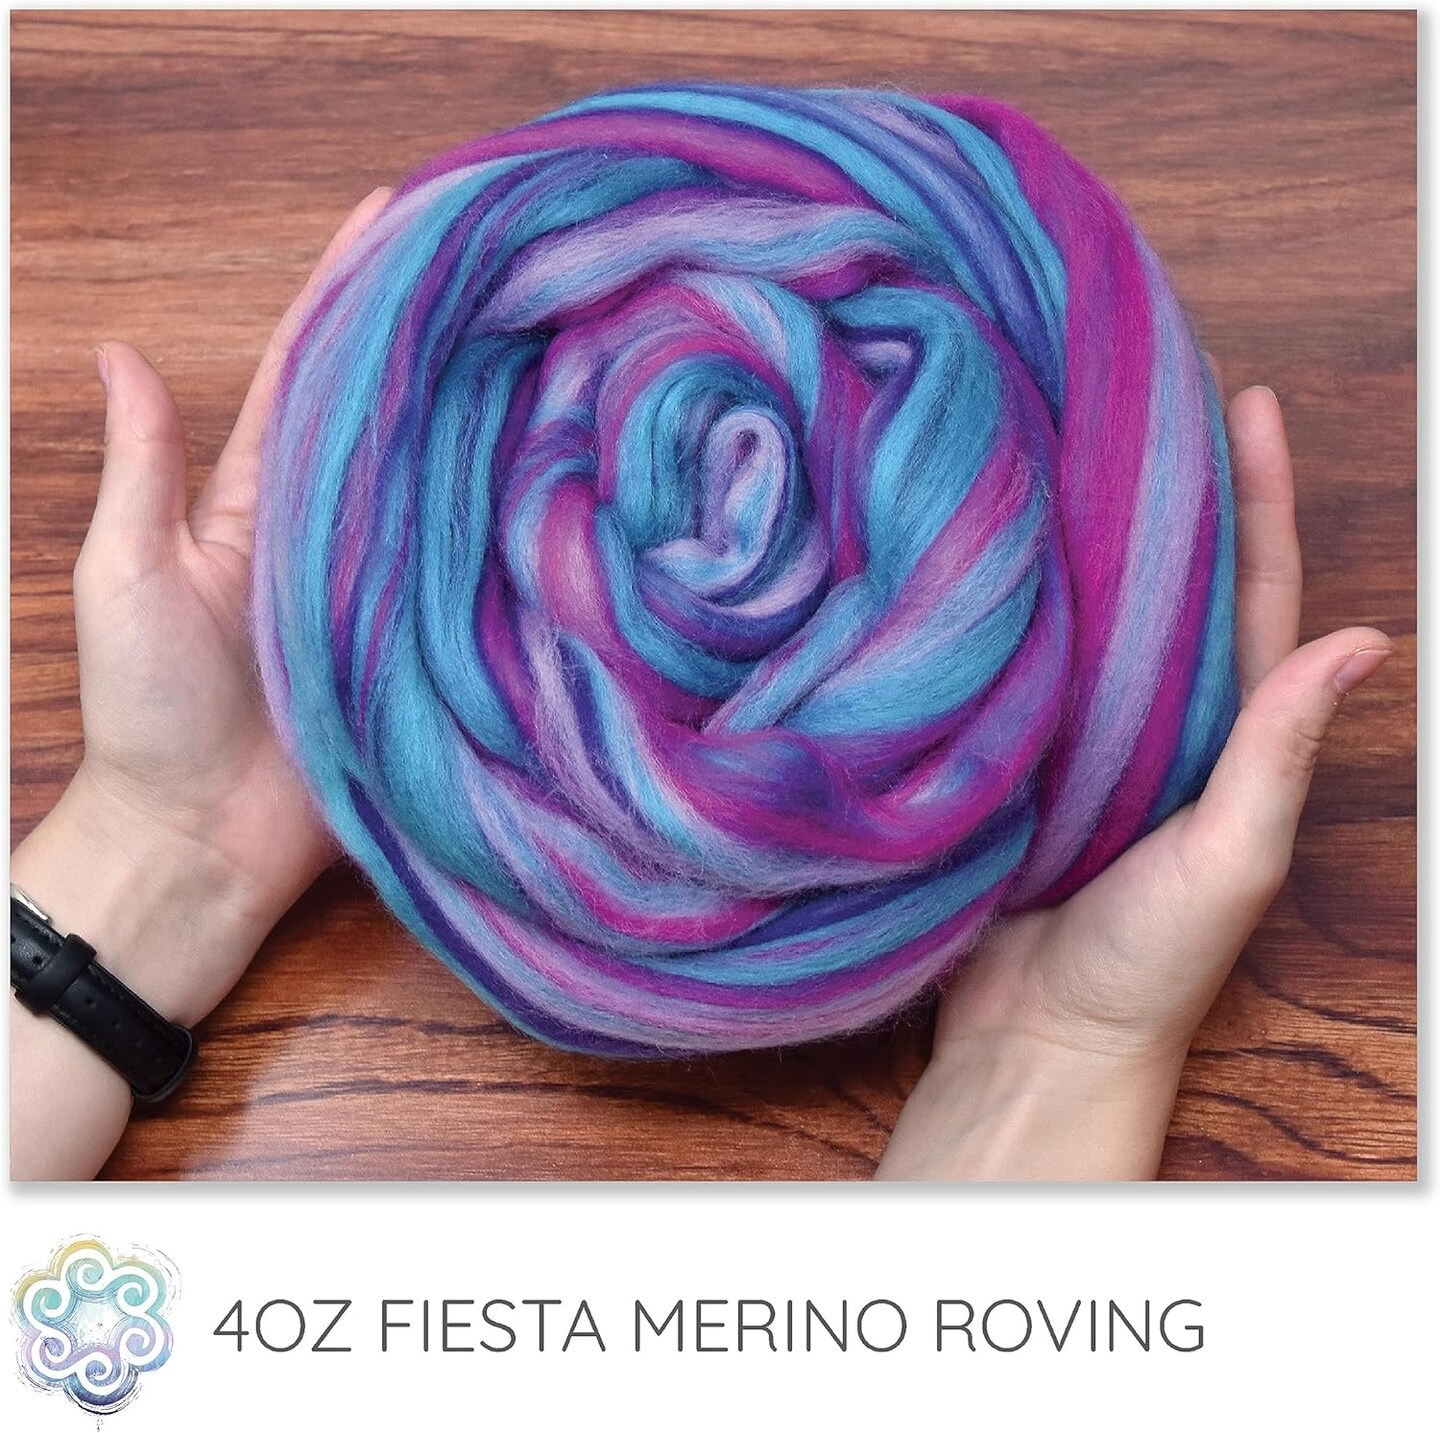 Fiesta Colorful Merino Wool Combed Top Roving for Spinning and Felting. Limited Edition. Alicorn Dream